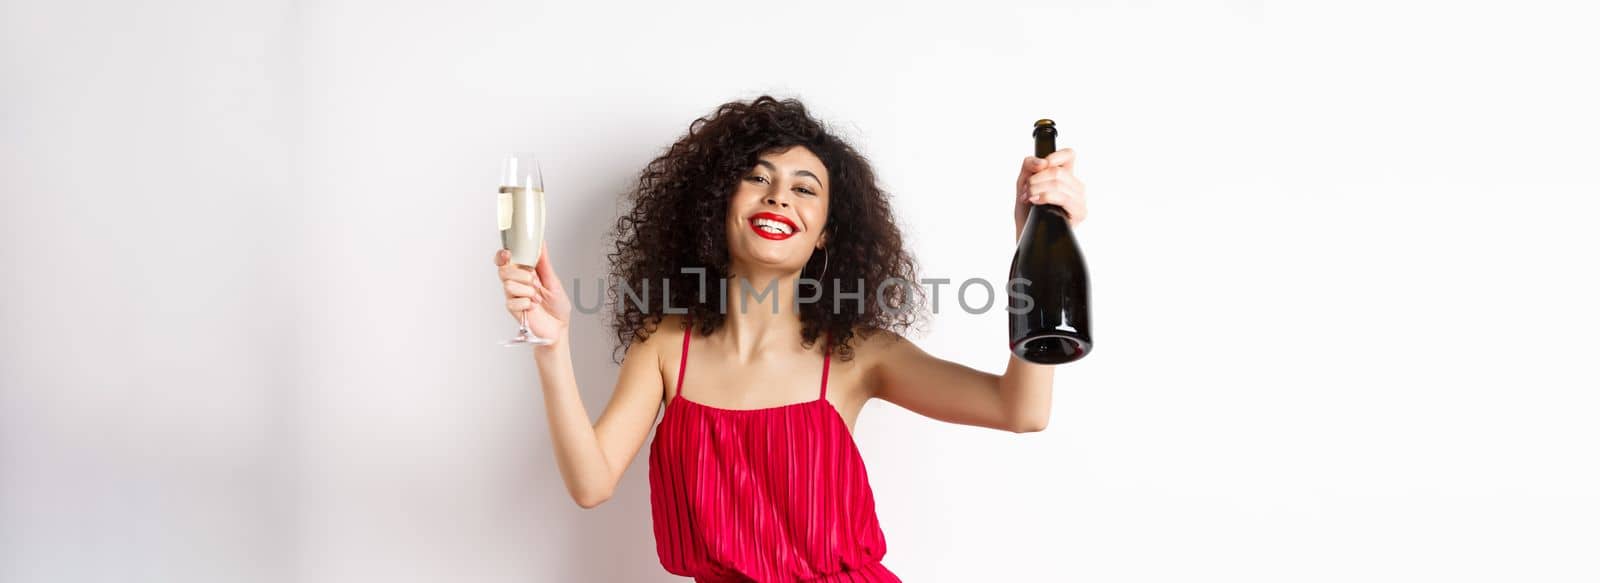 Happy party girl in red dress, dancing with bottle of champagne and glass, drinking and having fun, celebrating holiday, standing on white background.